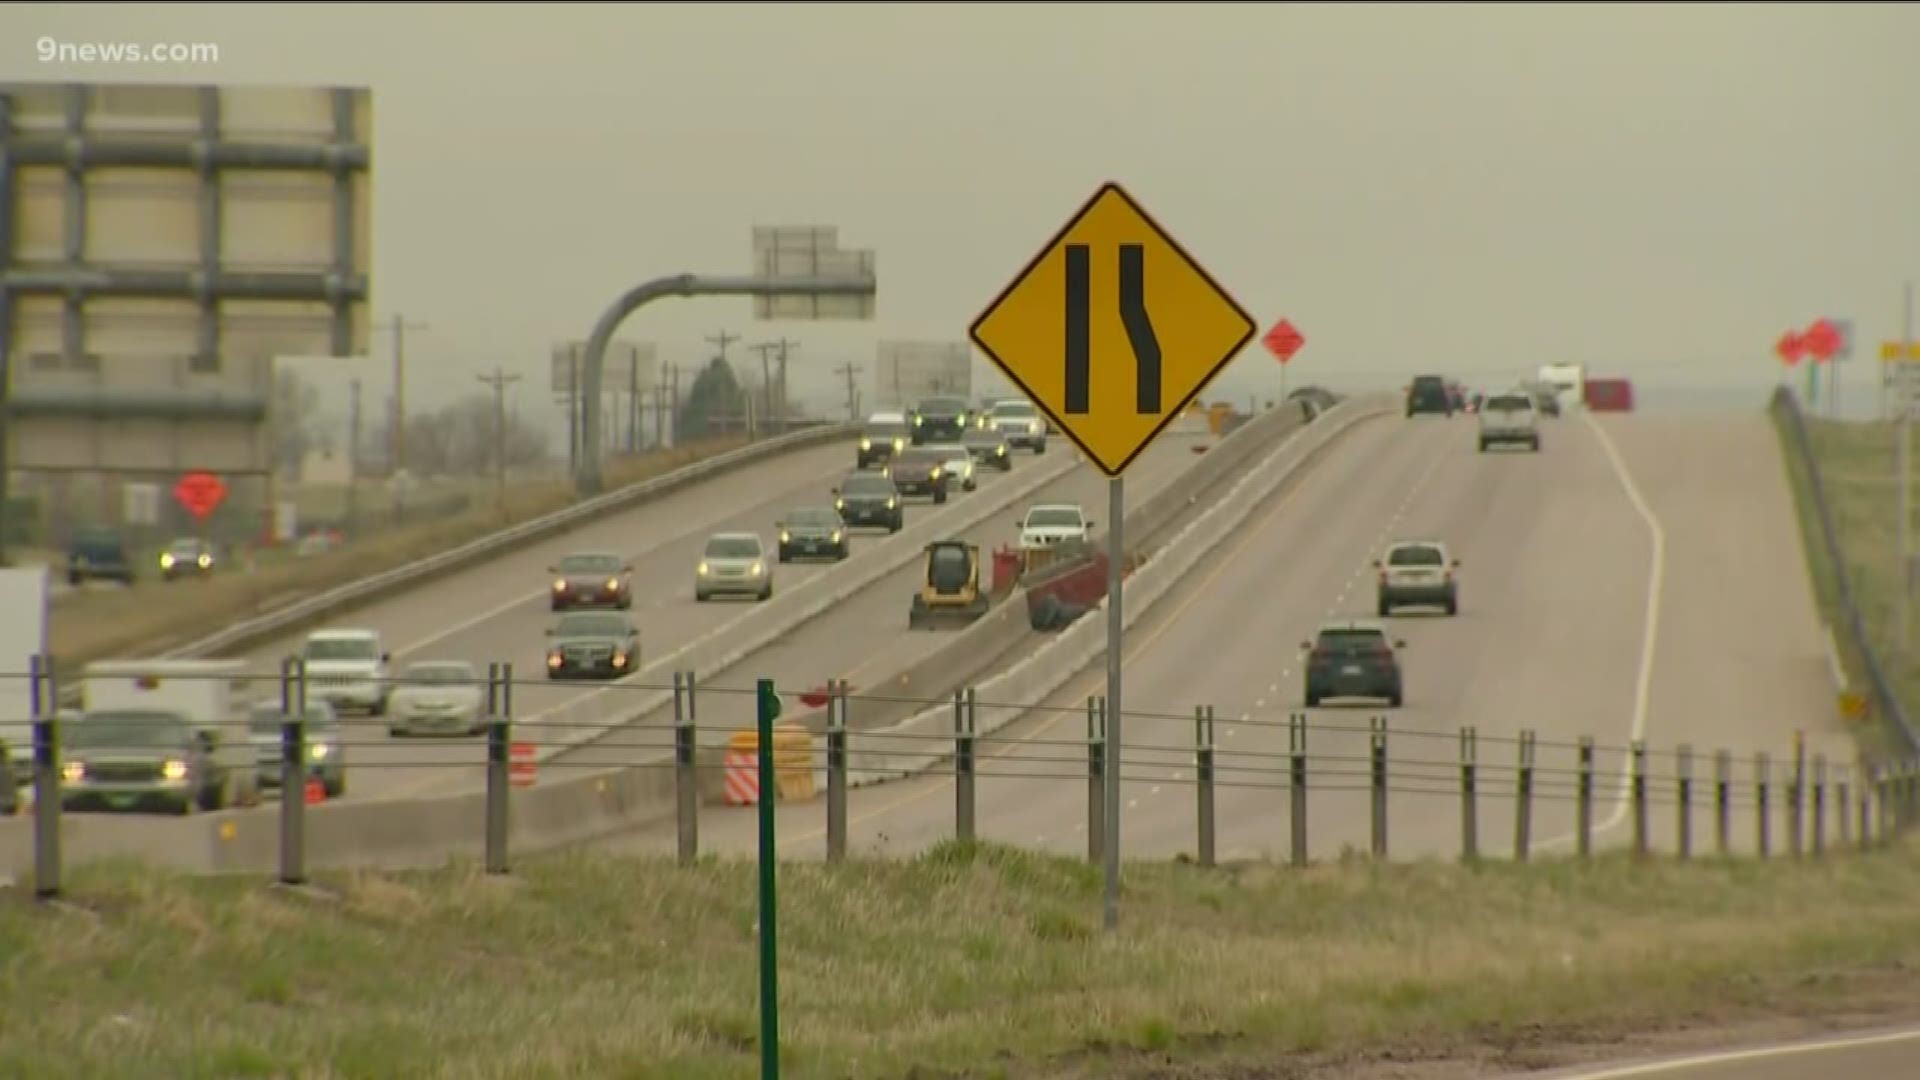 The City of Aurora says the new interchange will provide much-needed north-south connectivity on Picadilly Road where it intersects with the I-70.